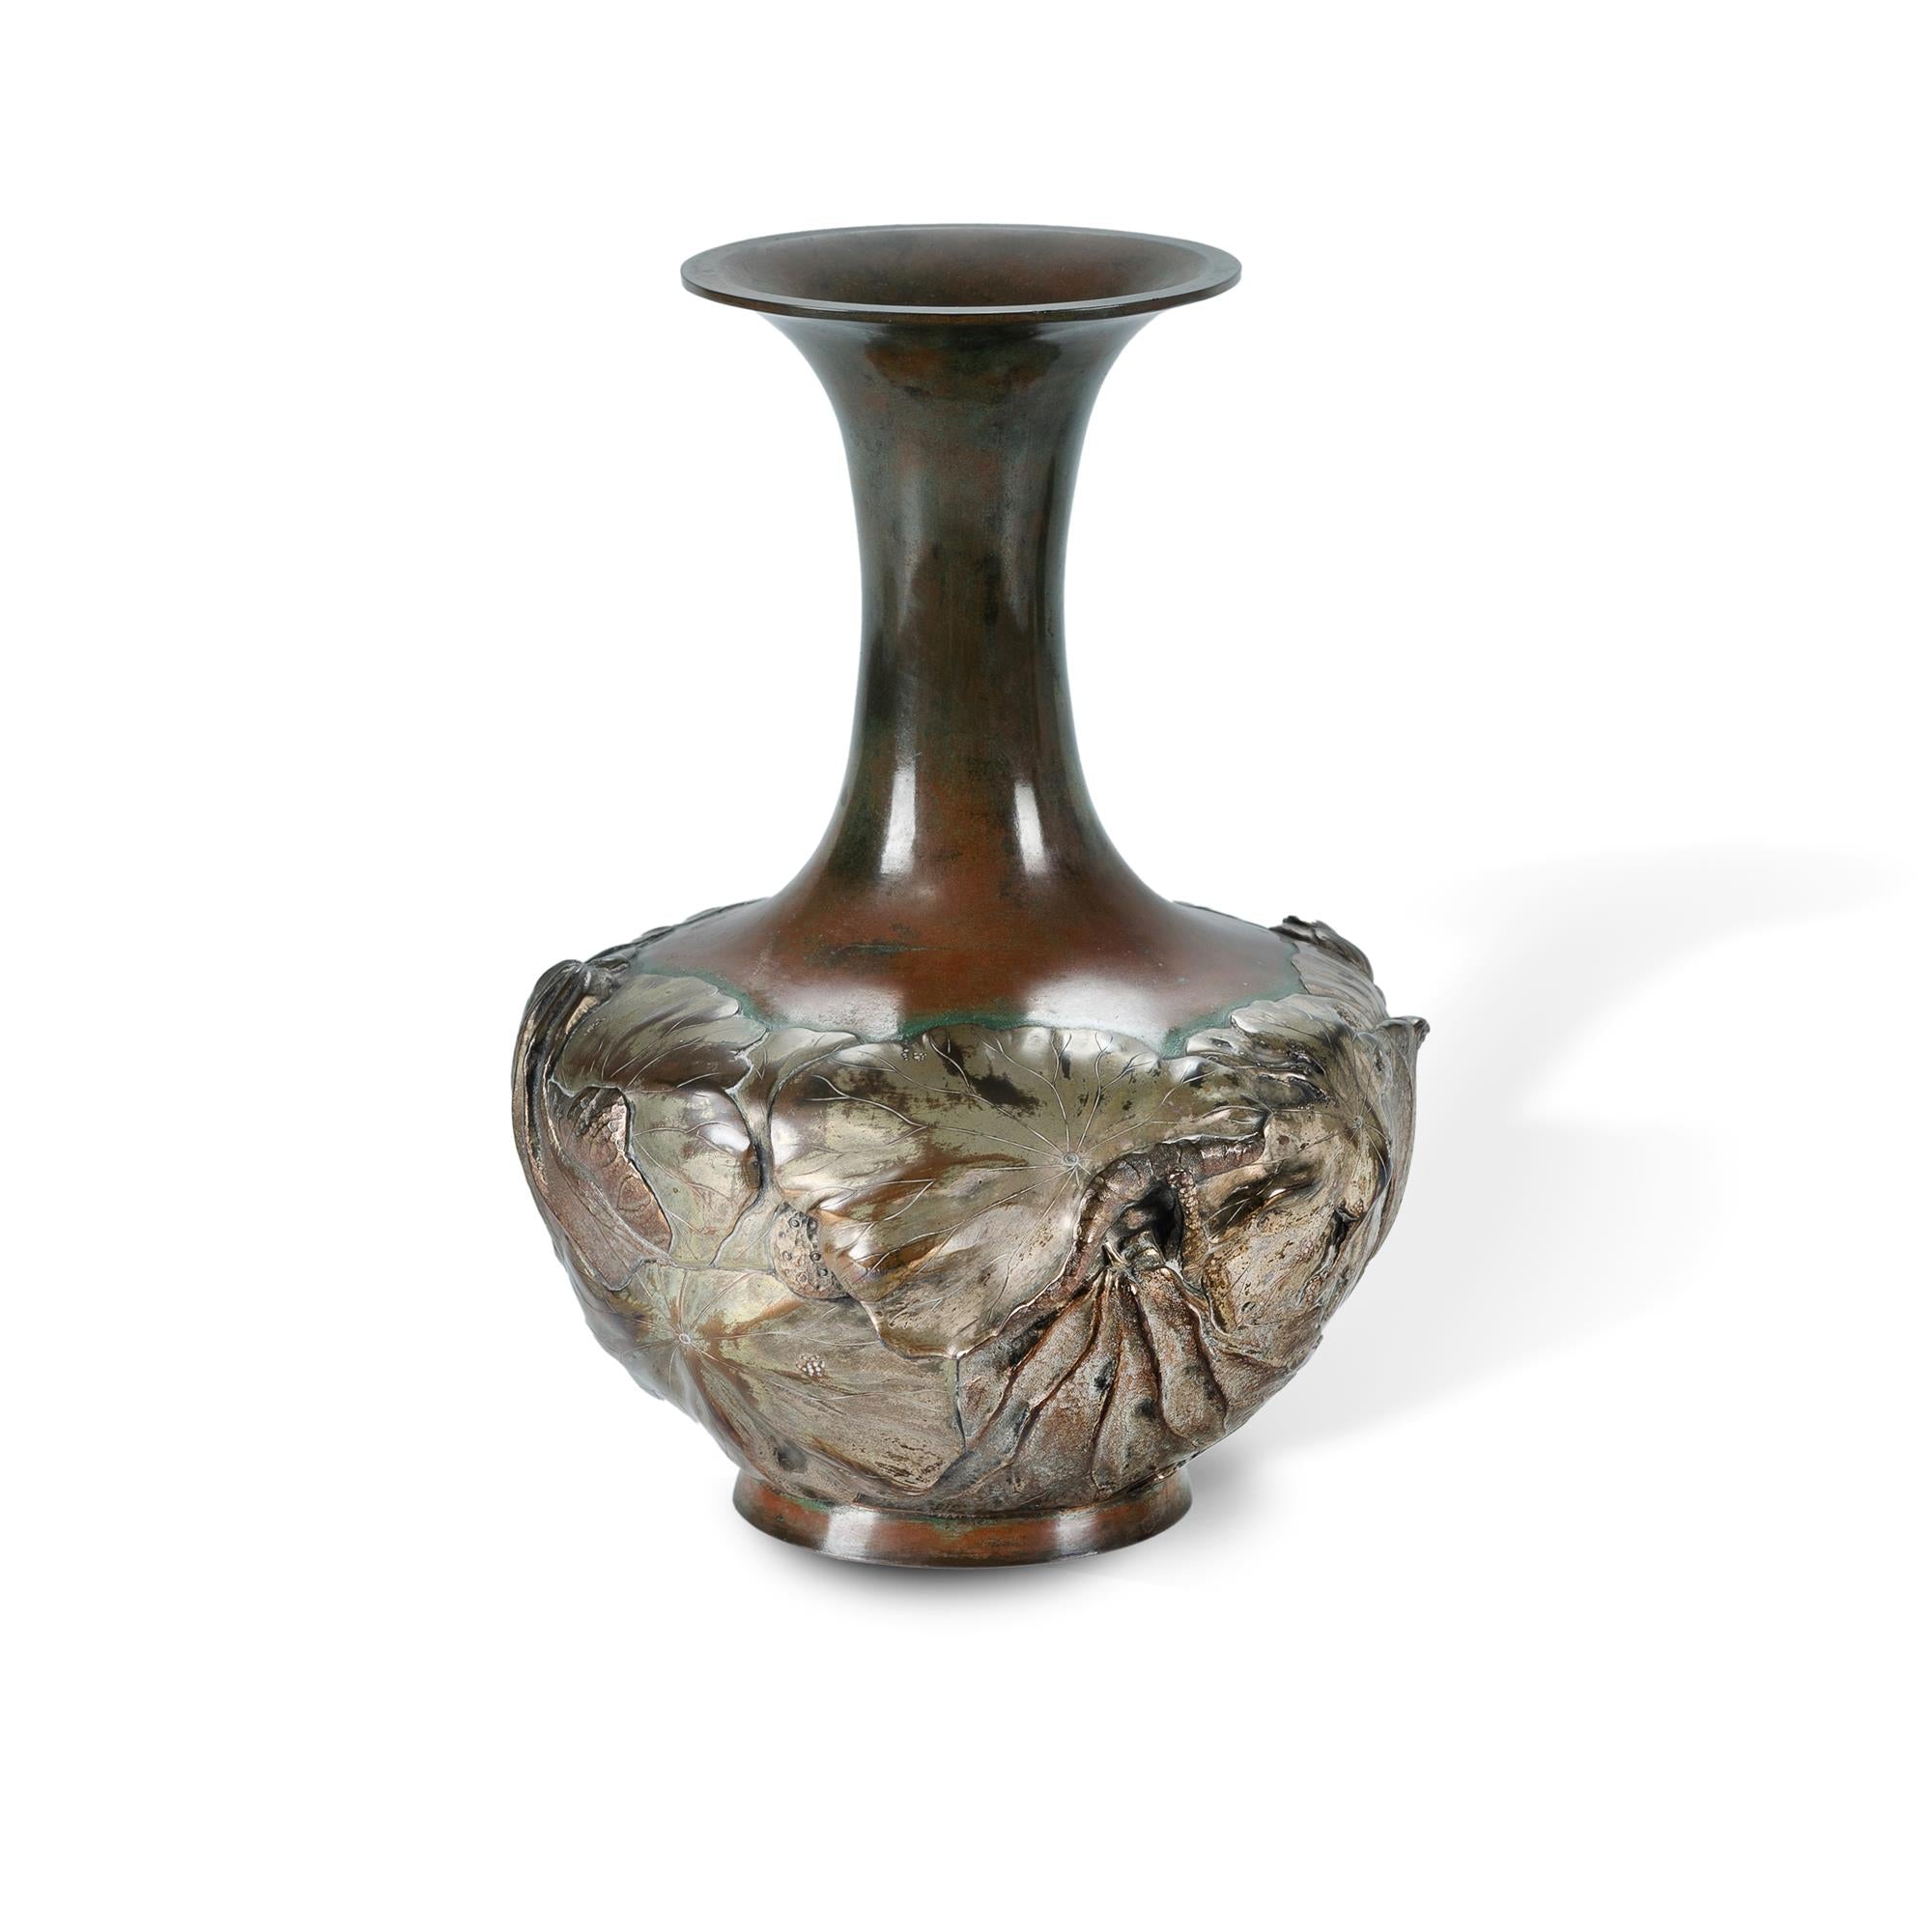 A Japanese mixed metal vase decorated with lotus plants in high relief.